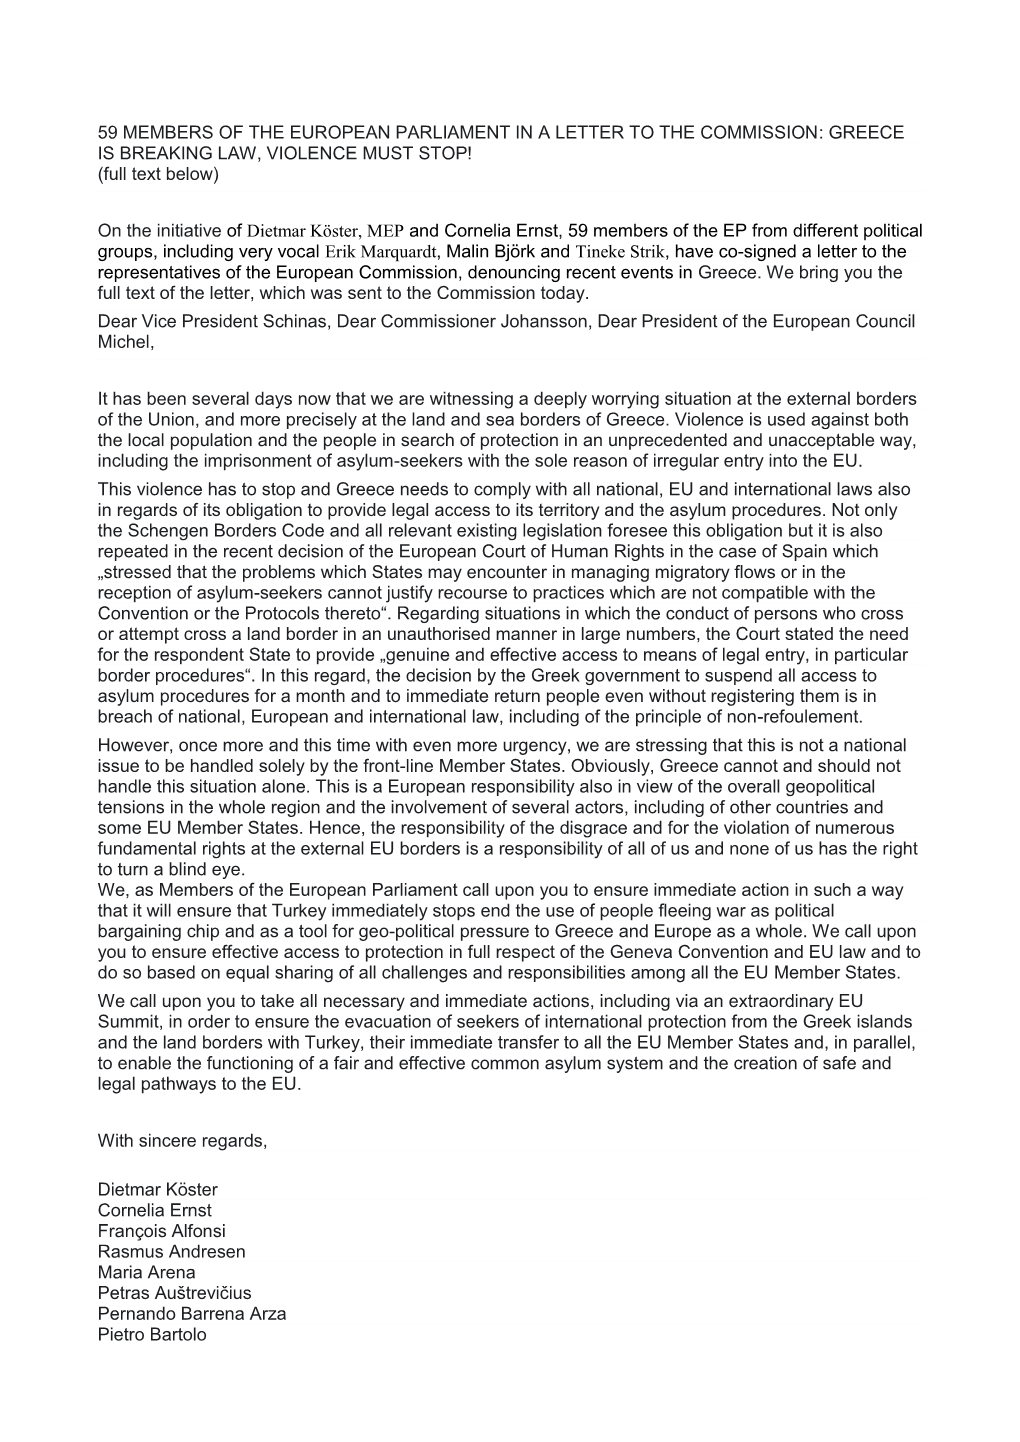 59 MEMBERS of the EUROPEAN PARLIAMENT in a LETTER to the COMMISSION: GREECE IS BREAKING LAW, VIOLENCE MUST STOP! (Full Text Below)